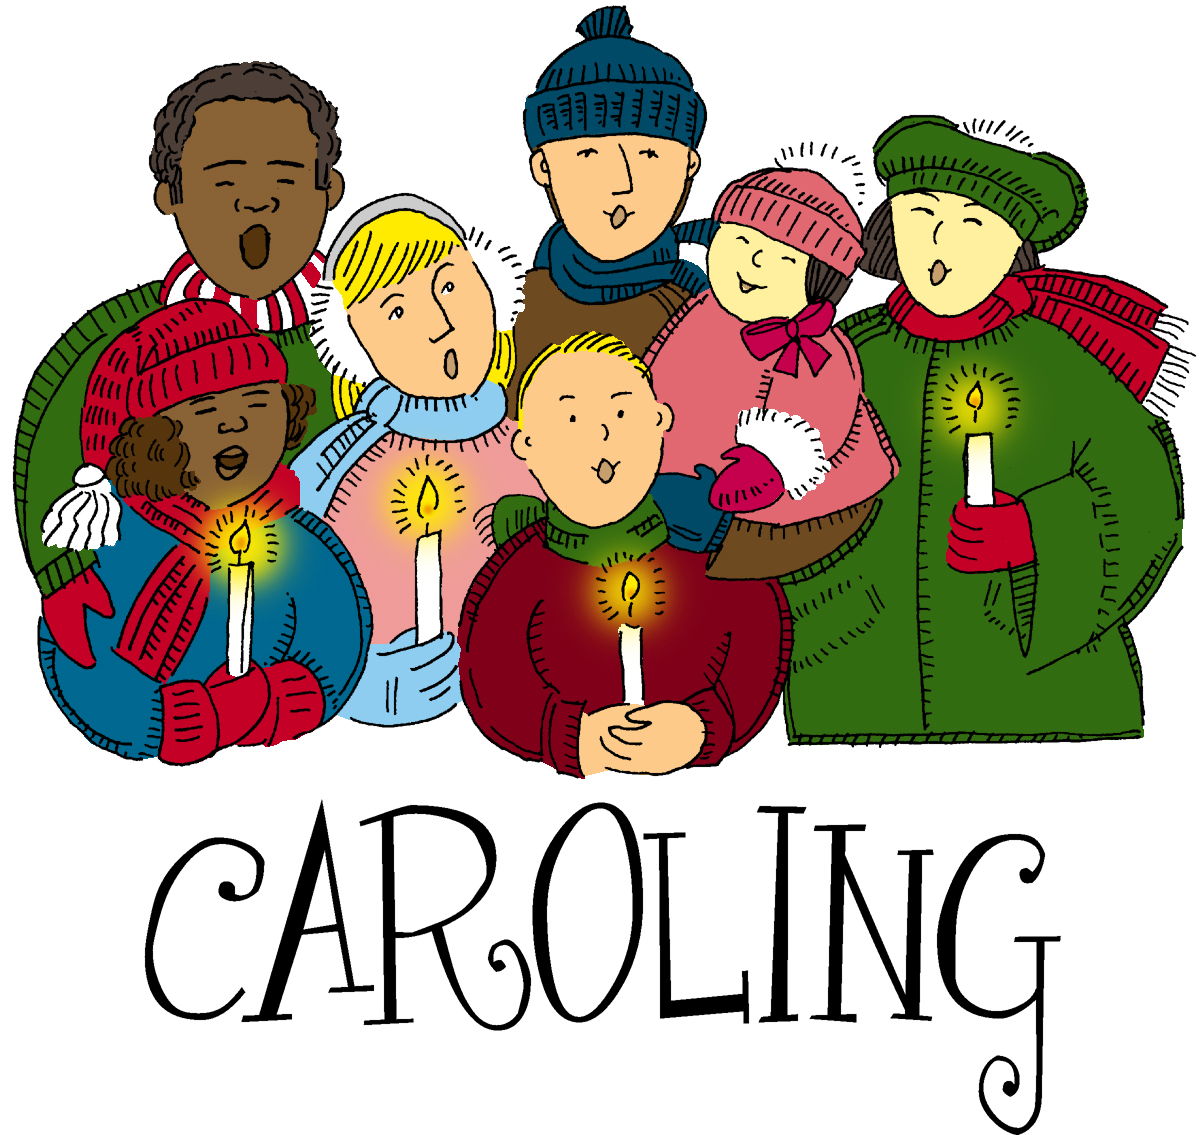 Everyone invited to go. Caroling clipart school